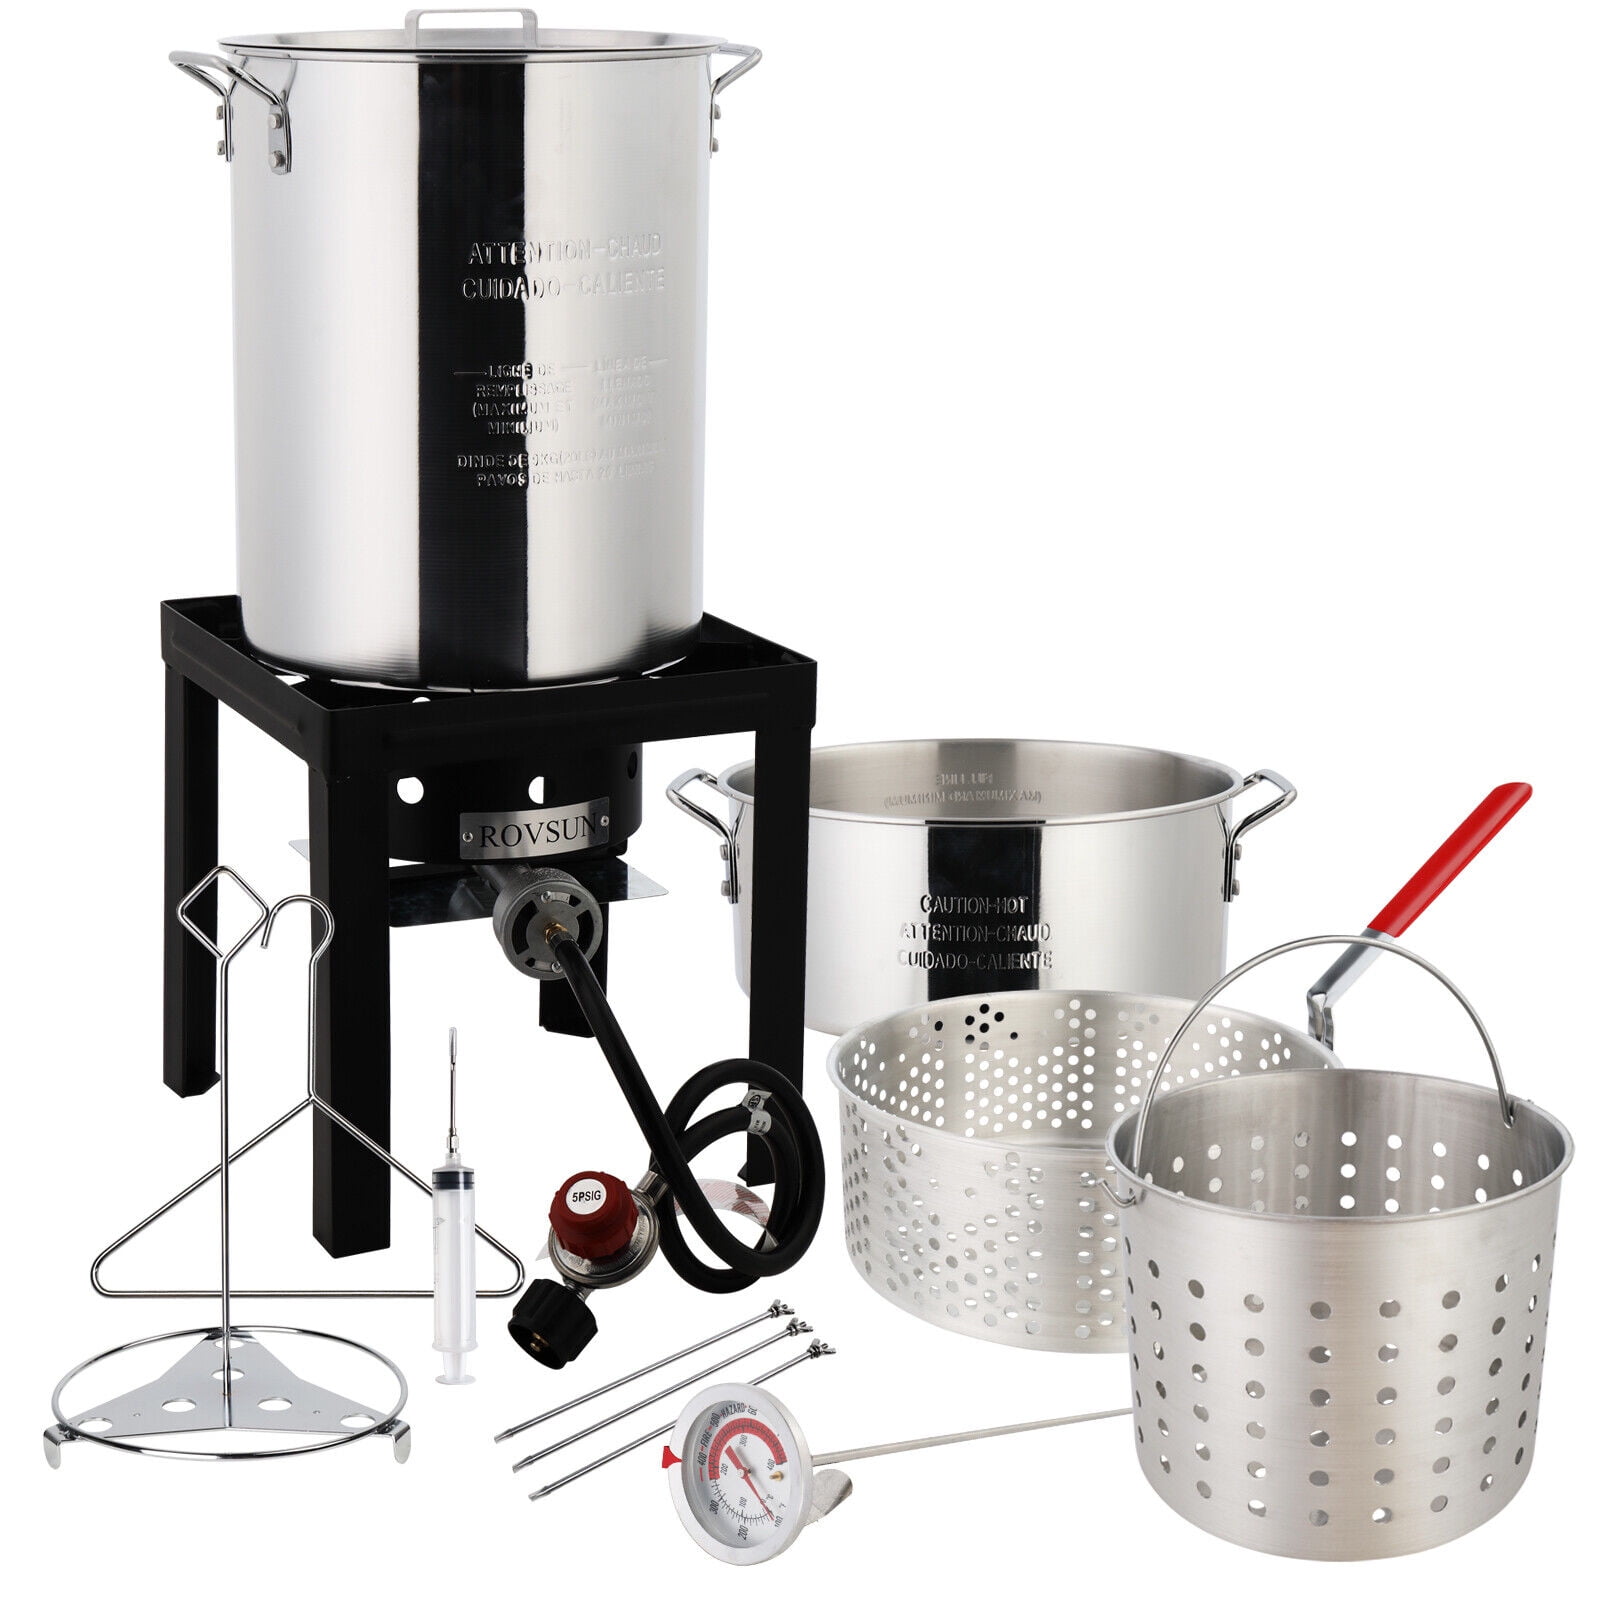 High Performance Cookers 30 qt. Turkey Fryer Powered Pot with Turkey Rack, Lid, Built-in Stand, 3/4 in. Drain Value and 10 PSI Regulator, Stainless